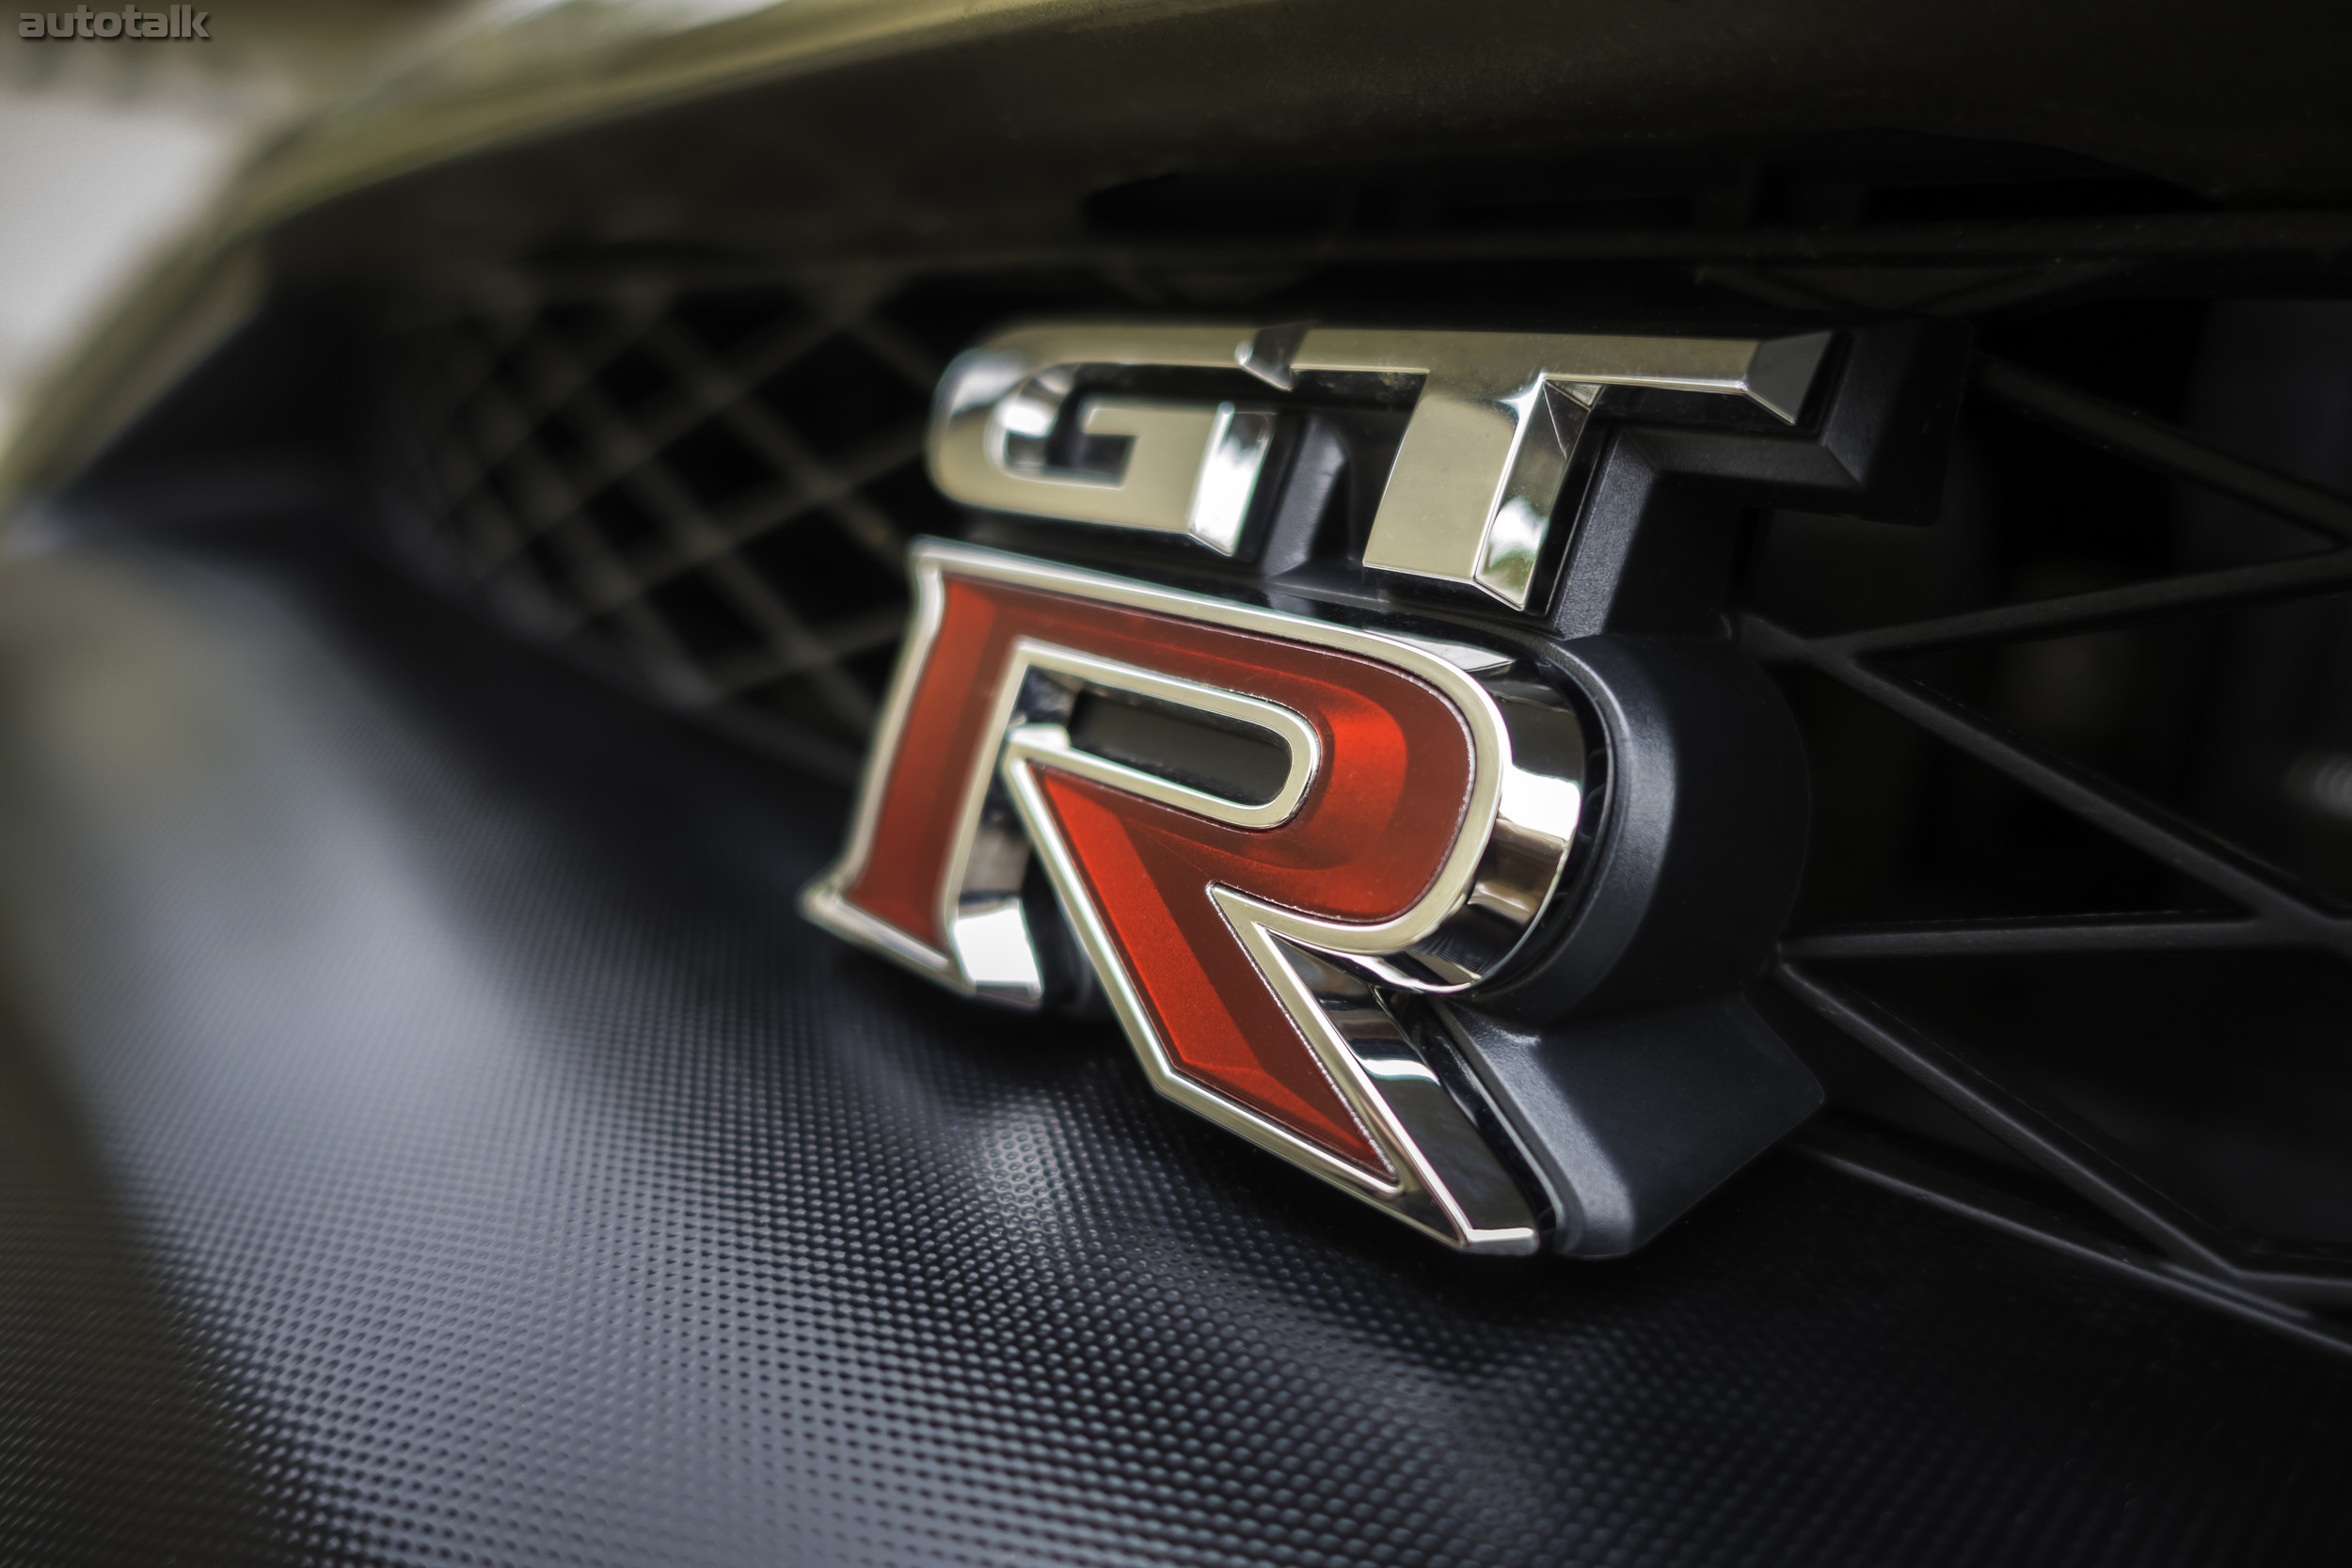 2016 Nissan GT-R 45th Anniversary Gold Edition